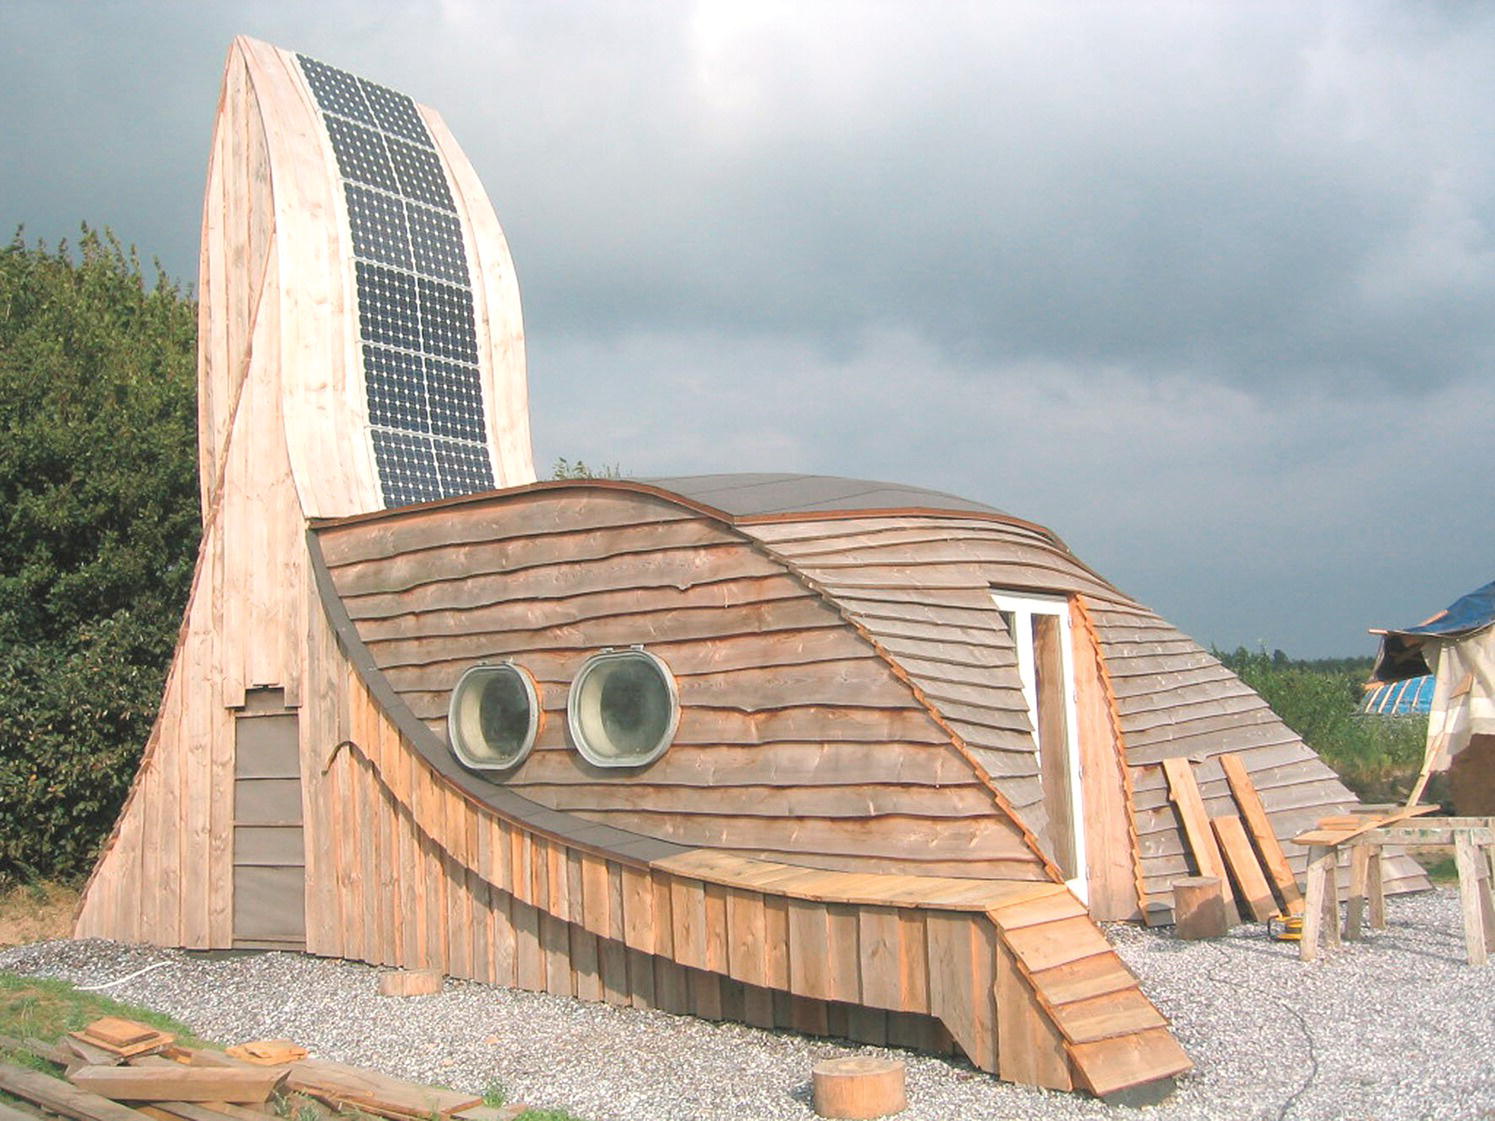 A wooden house with a solar panels on the roof in Denmark.